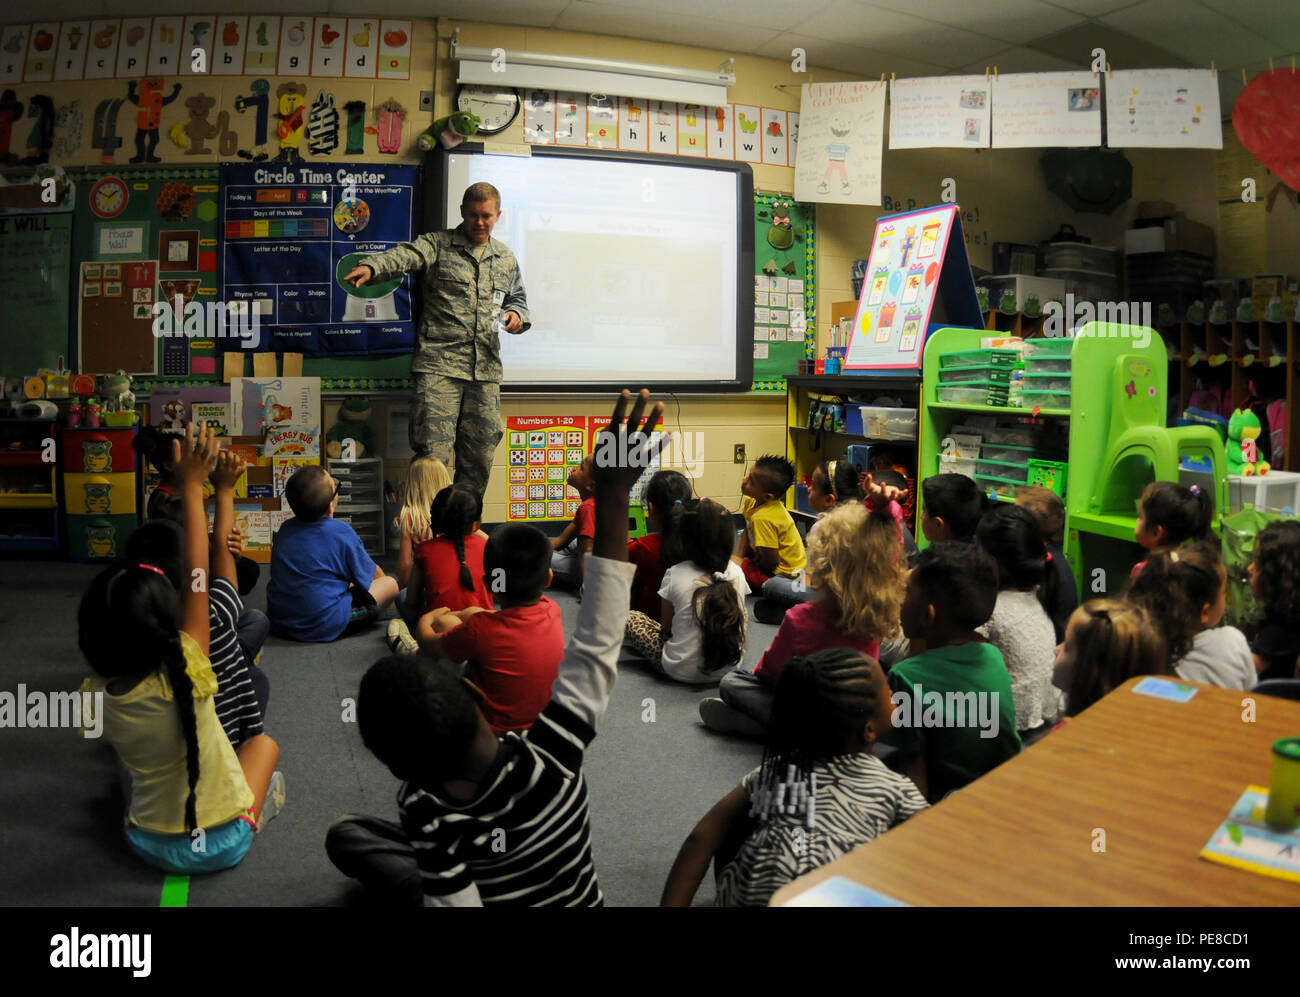 Master Sgt. Paul Denton, imagery analyst, answers questions from students at Sutton Elementary, Fort Smith, Ark., during Career Day Oct. 9, 2015. The 188th Wing has partnered with Sutton Elementary to provide a positive influence to children within the community. (U.S. Air National Guard photo by Senior Airman Cody Martin/Released) Stock Photo